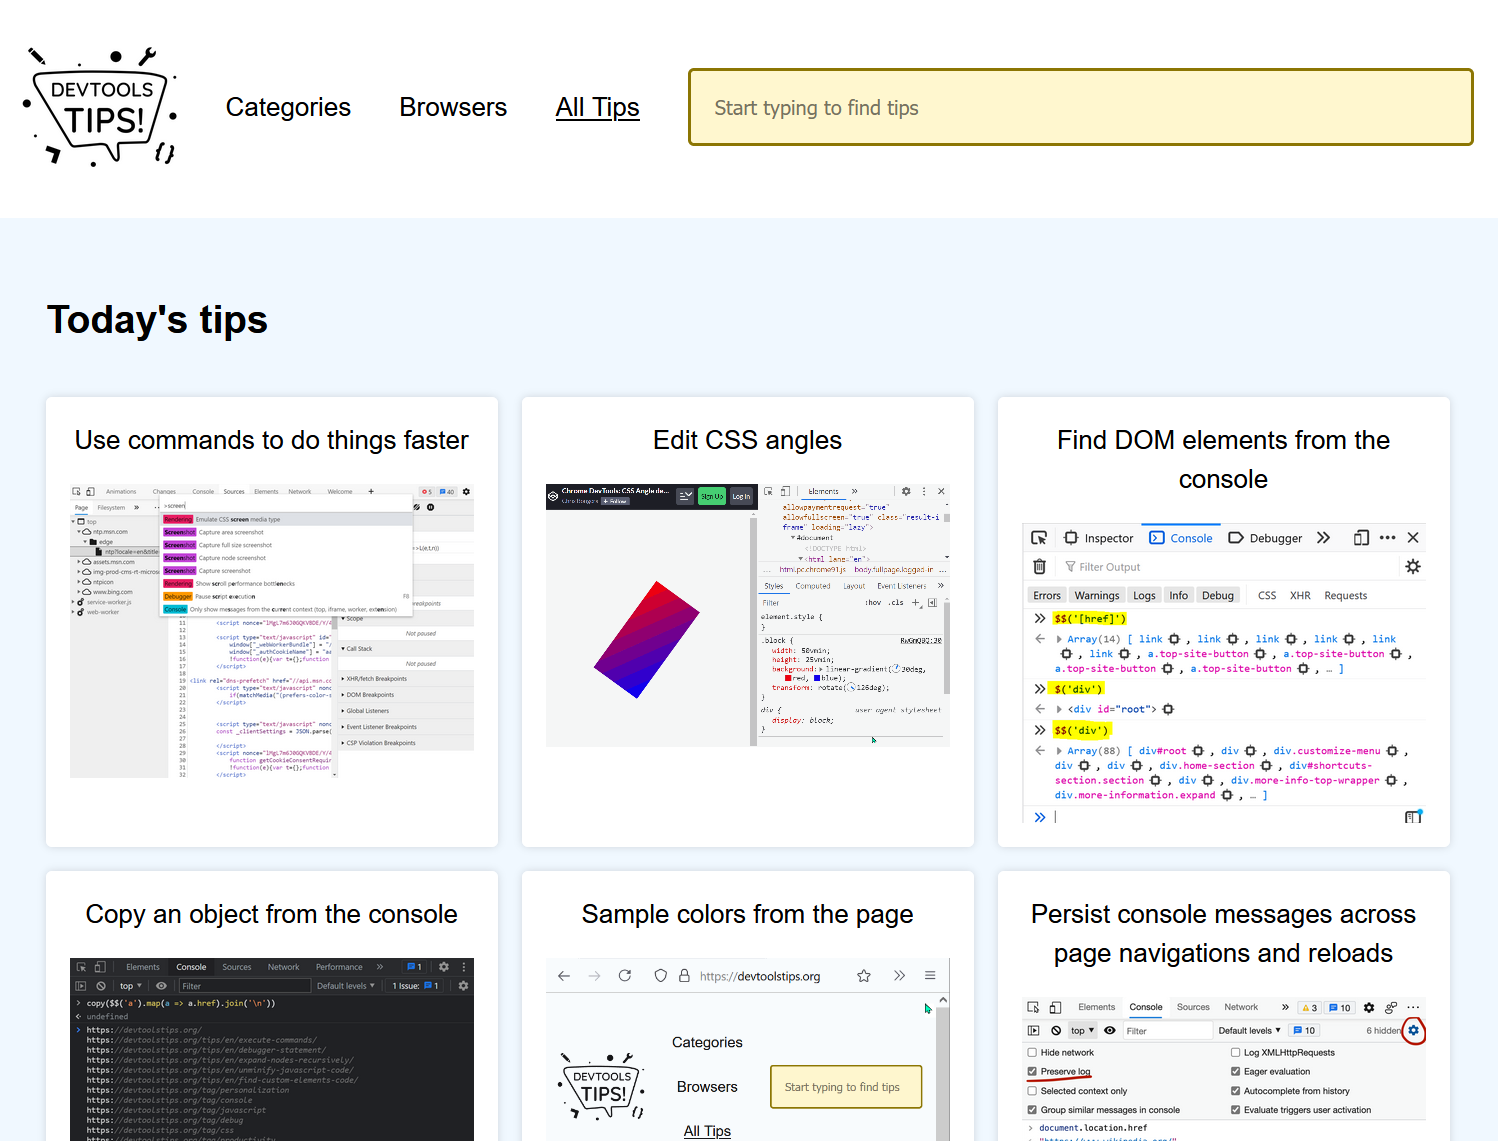 A screenshot of the devtools tips home page